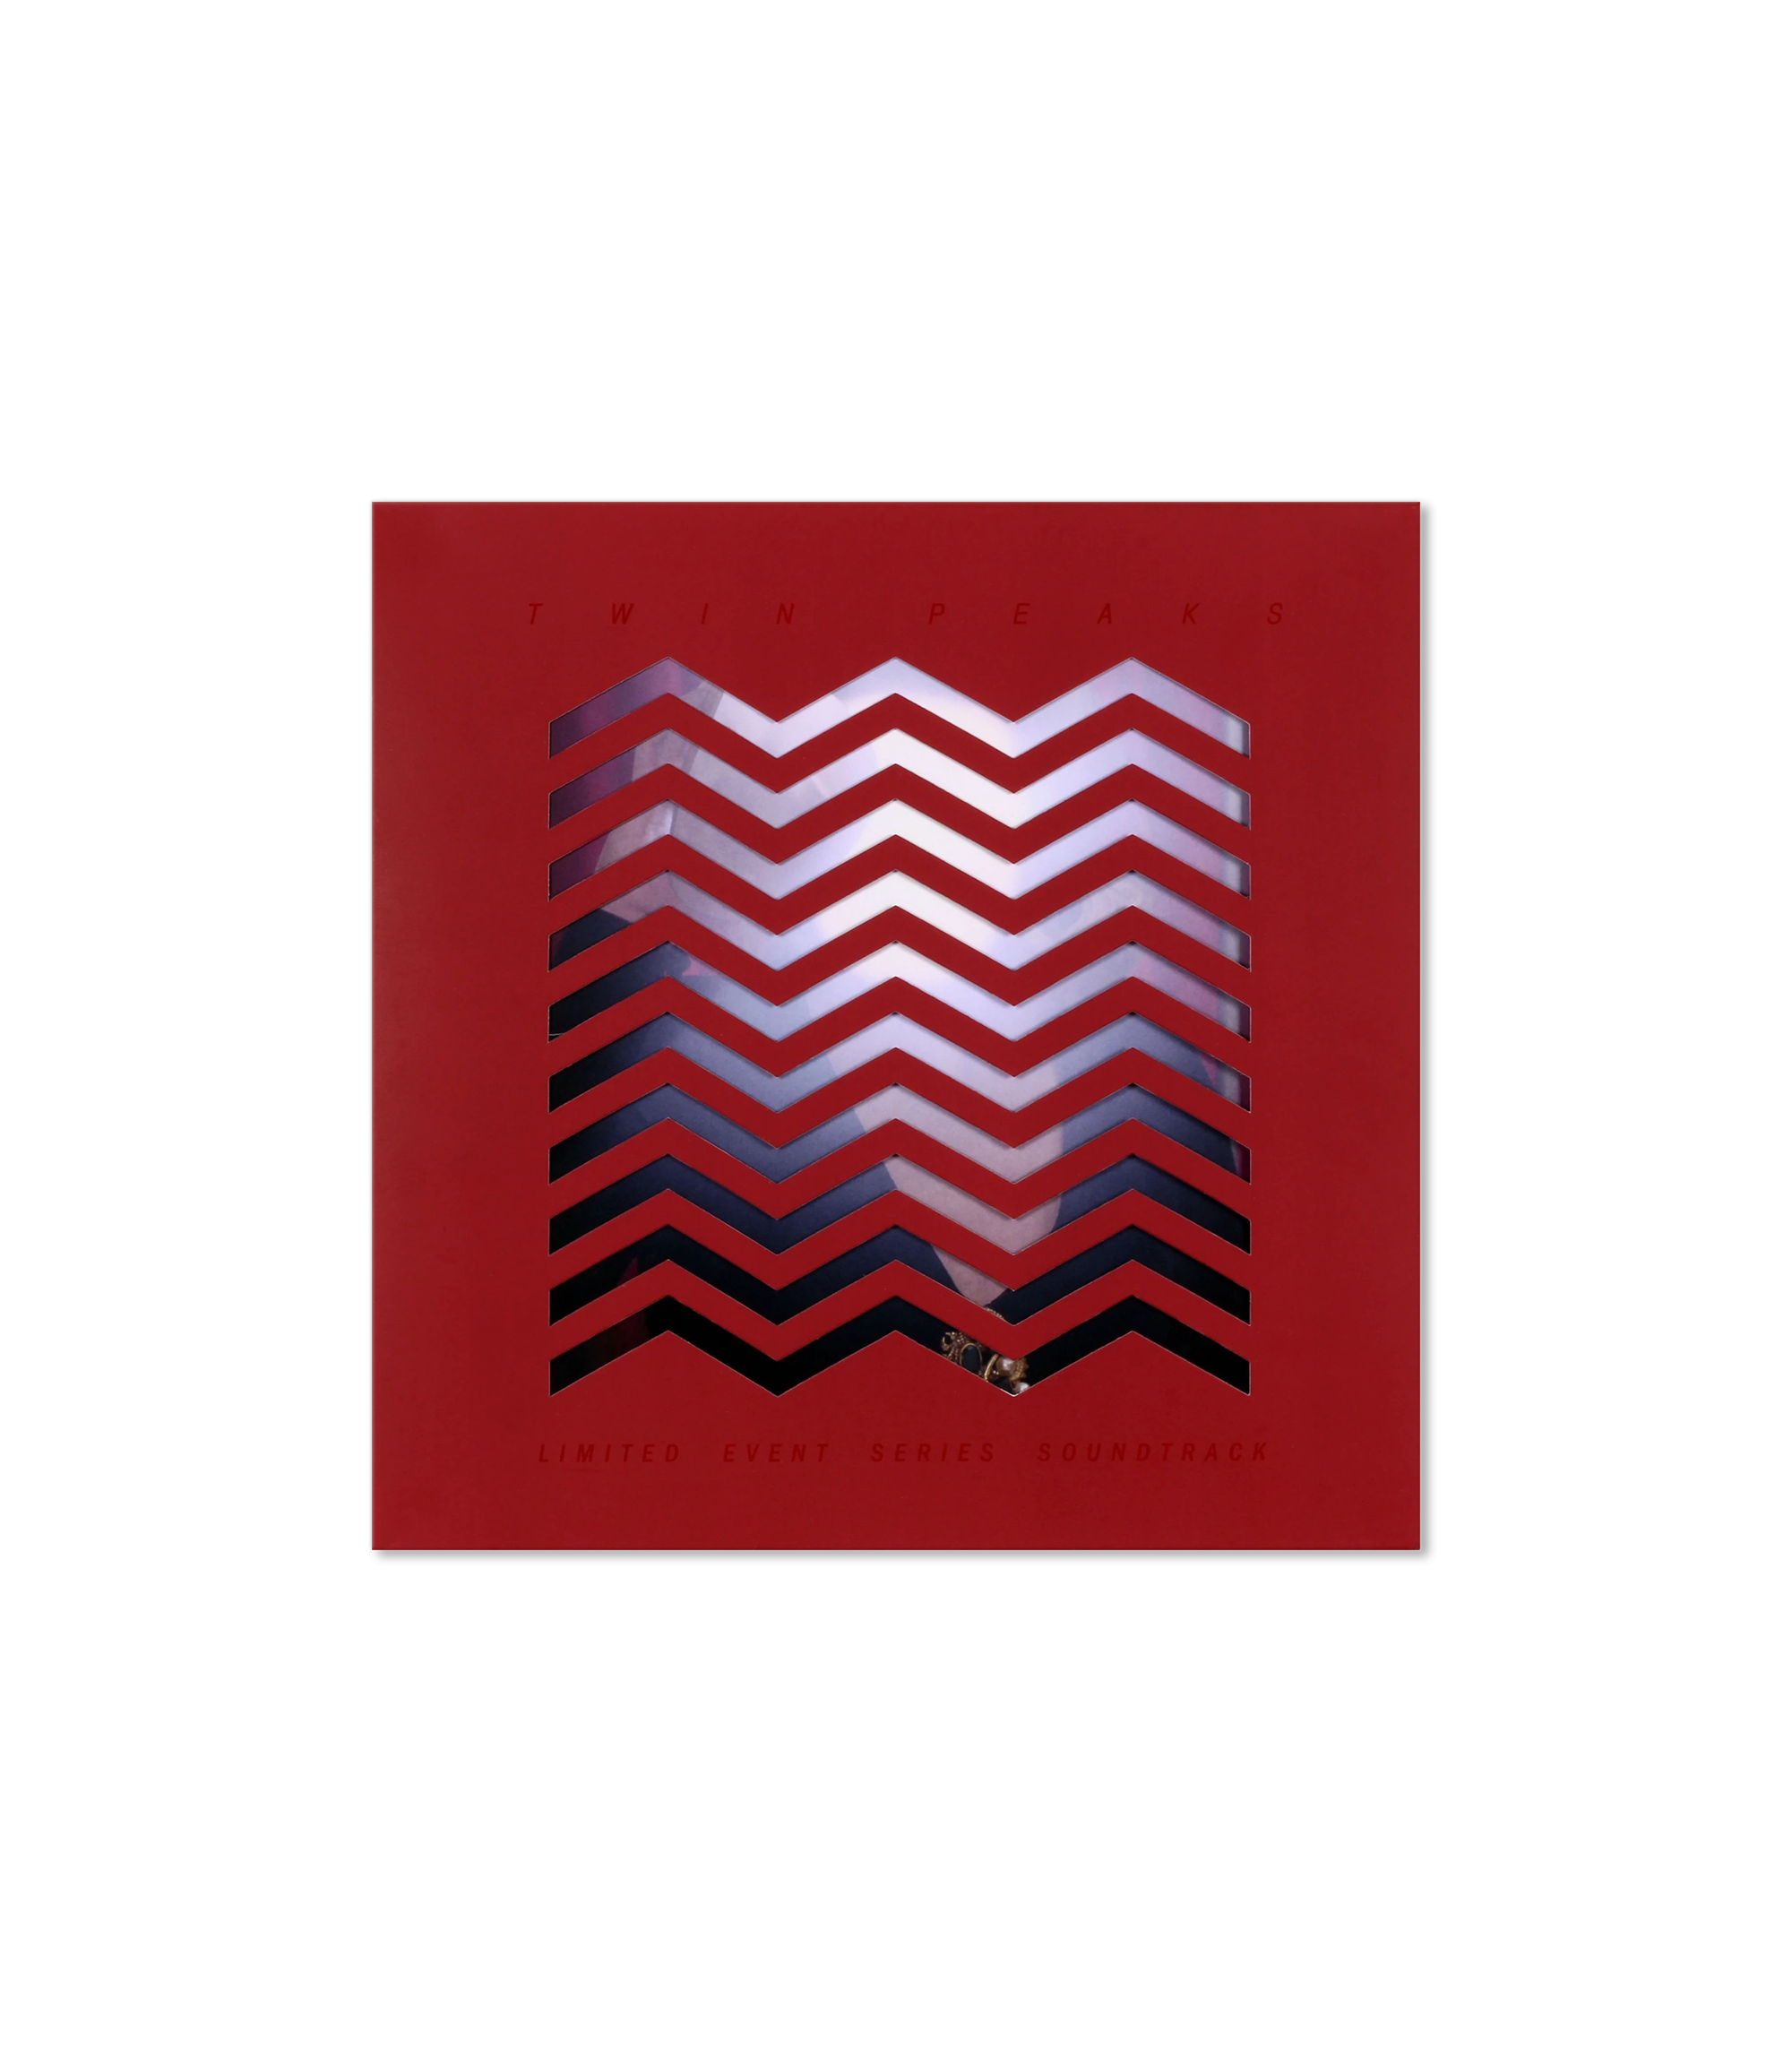 Twin Peaks - Limited event Series